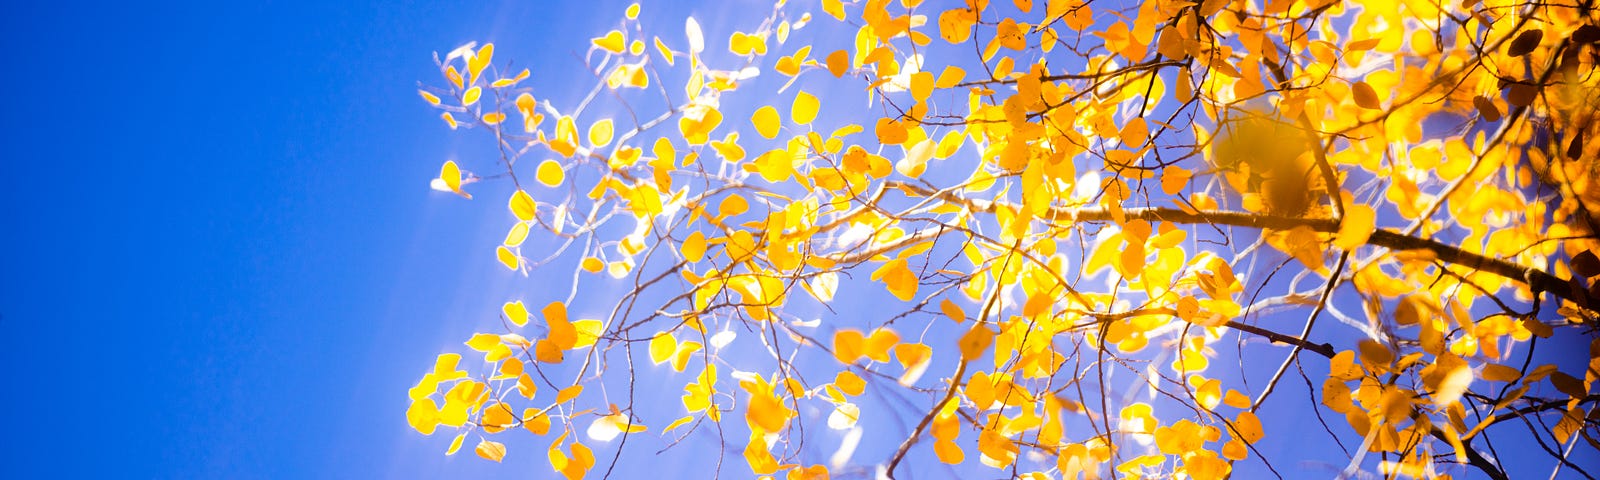 bright spring day with yellowish leaves on the tree